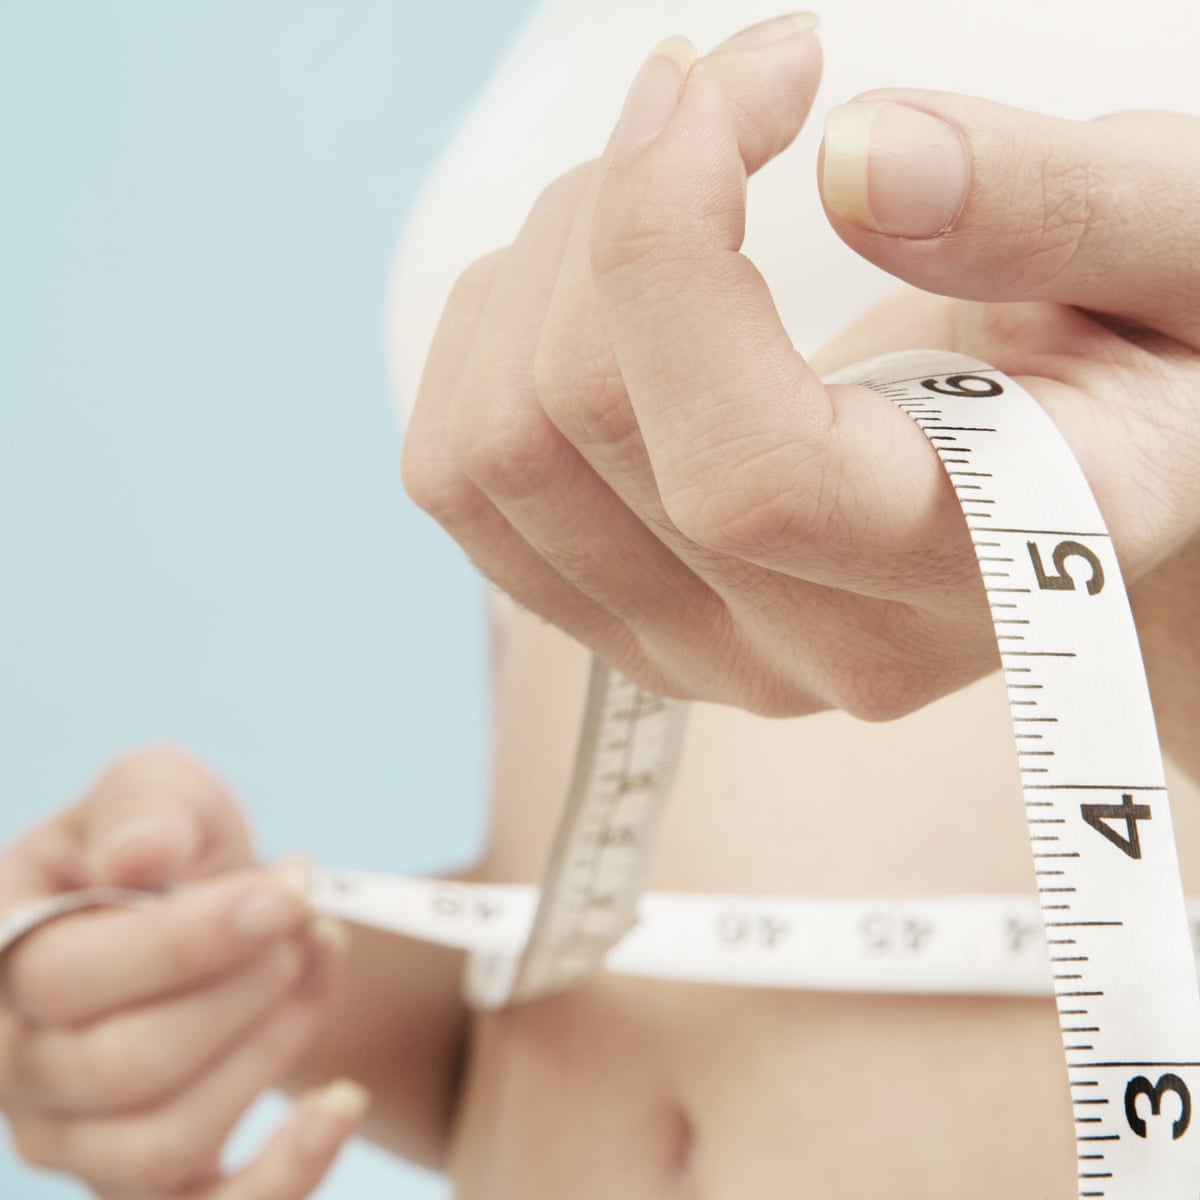 Ensure waist size is less than half your height, health watchdog says, Obesity